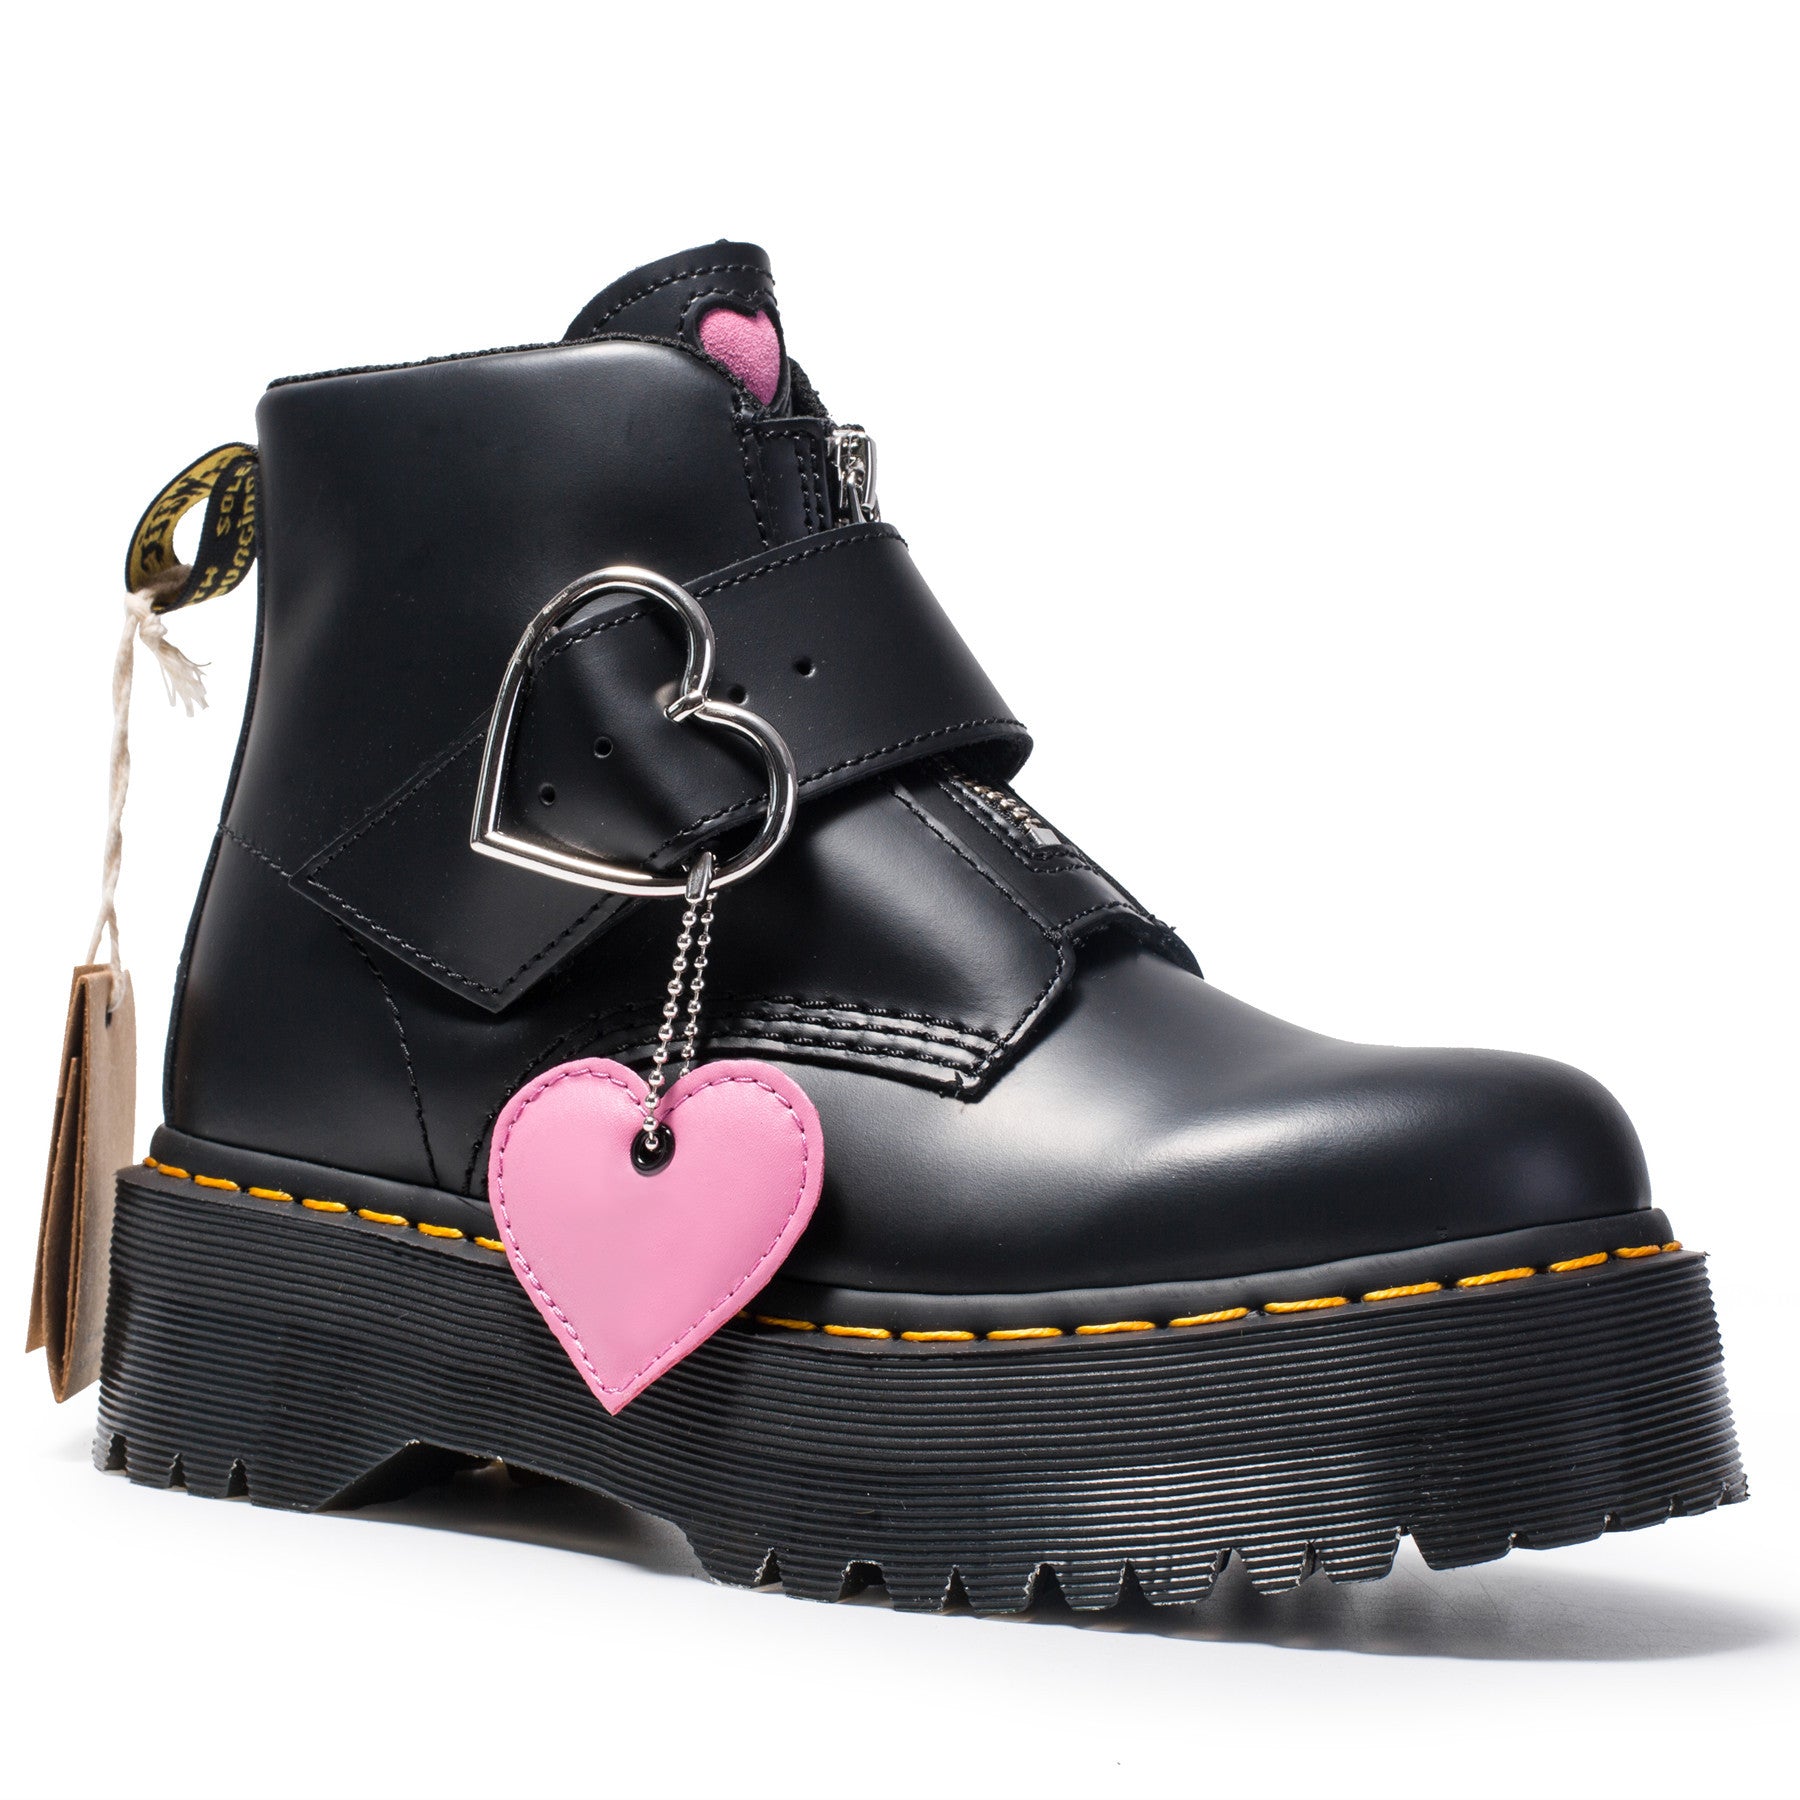 Peach heart fashion boots women zipper ankle boots - Outlets Forever